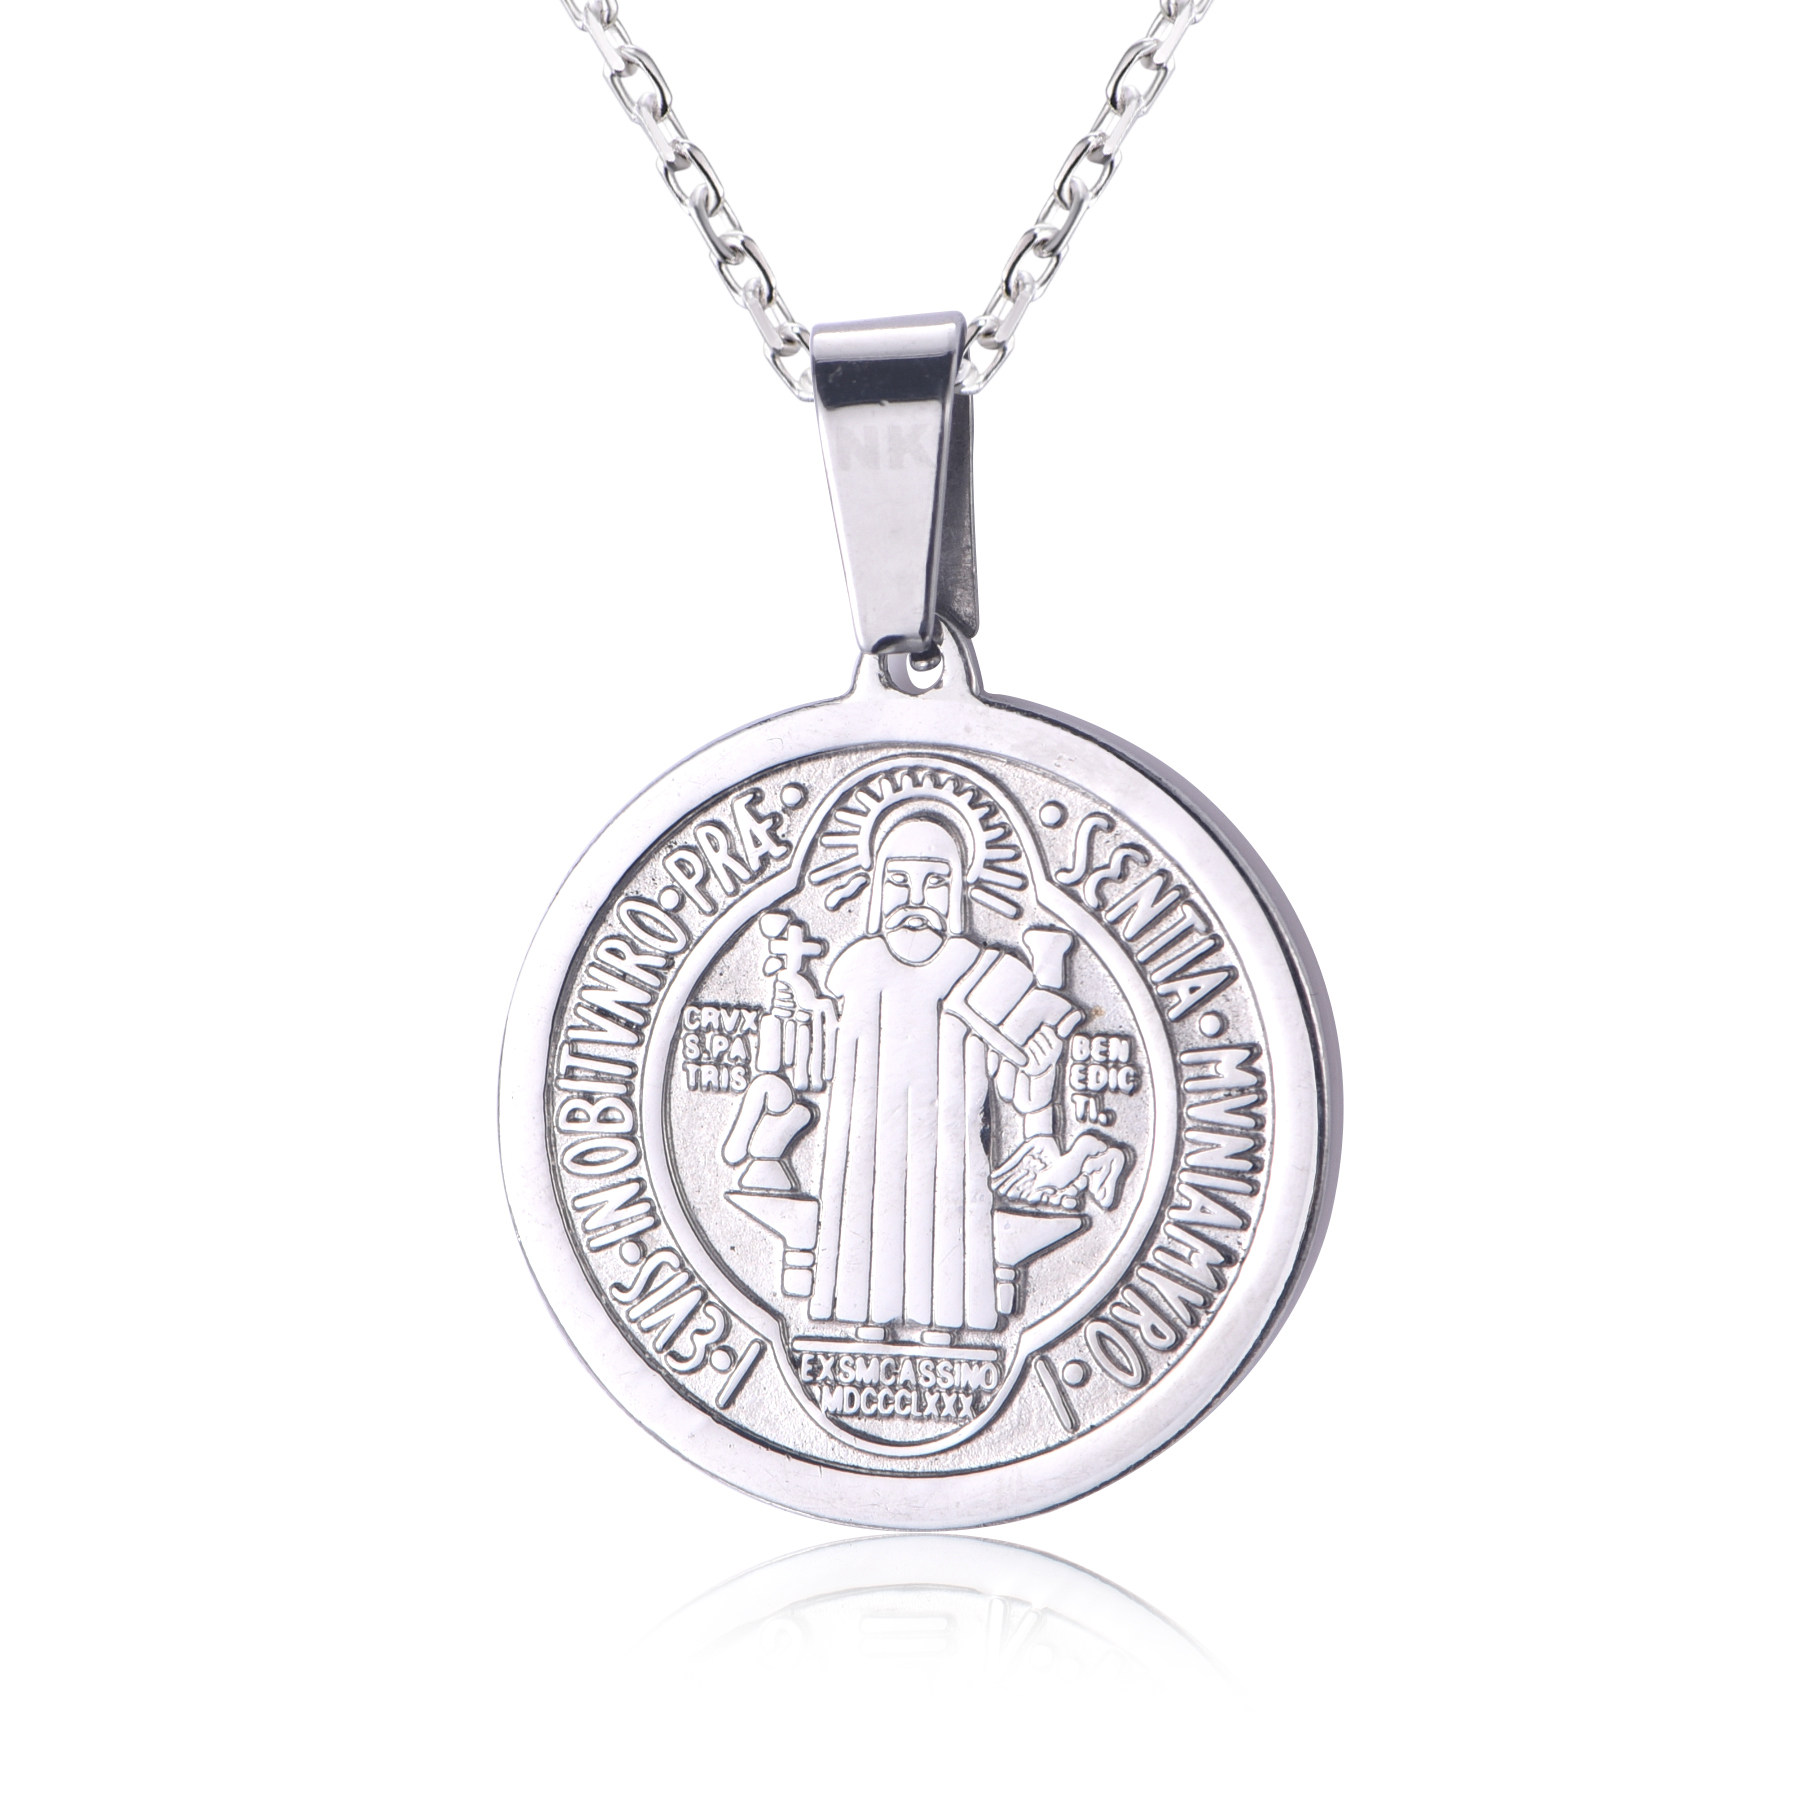 Religious Jewelry Stainless Steel Medalla San Benito Necklace NJ-09